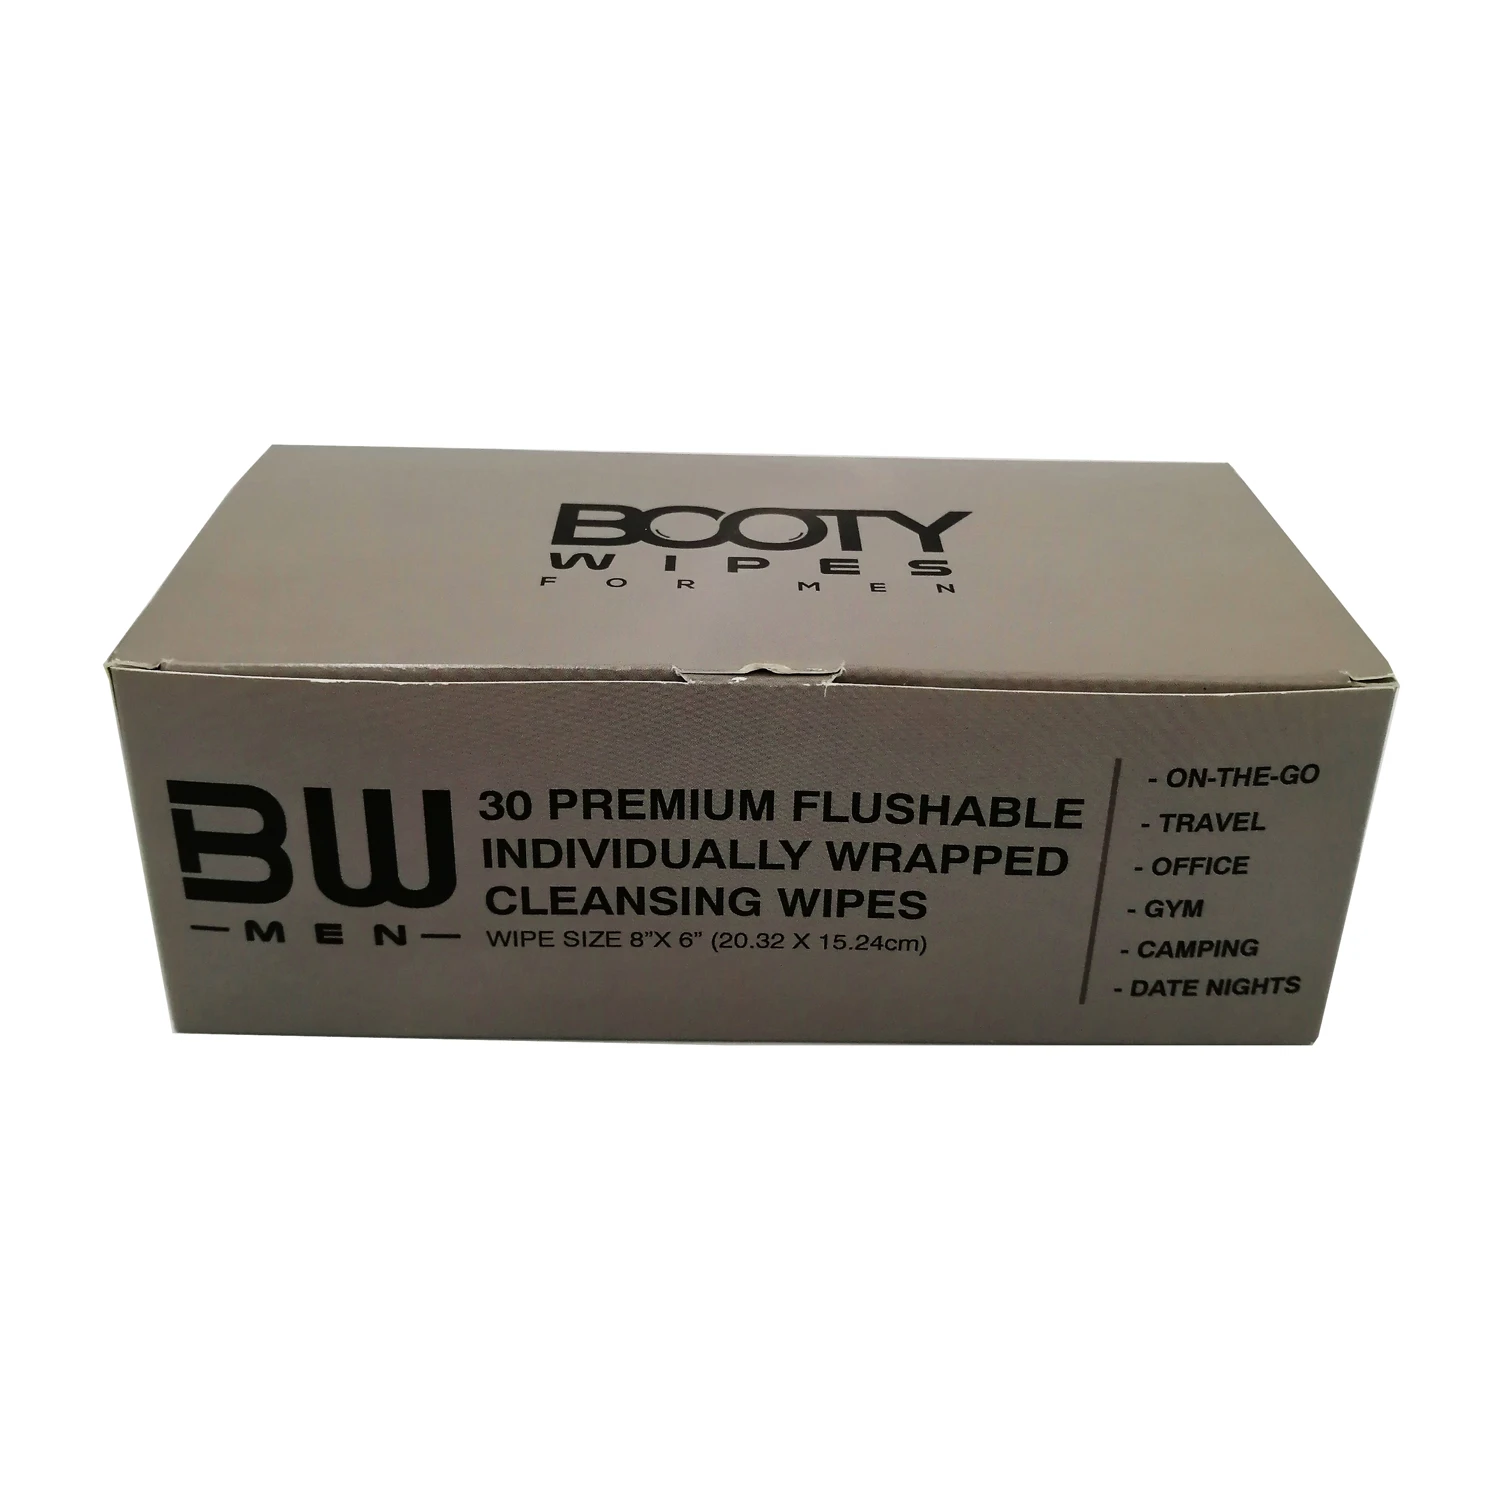 Private individual wrapped toilet wipes 100% biodegradable flushable wipes